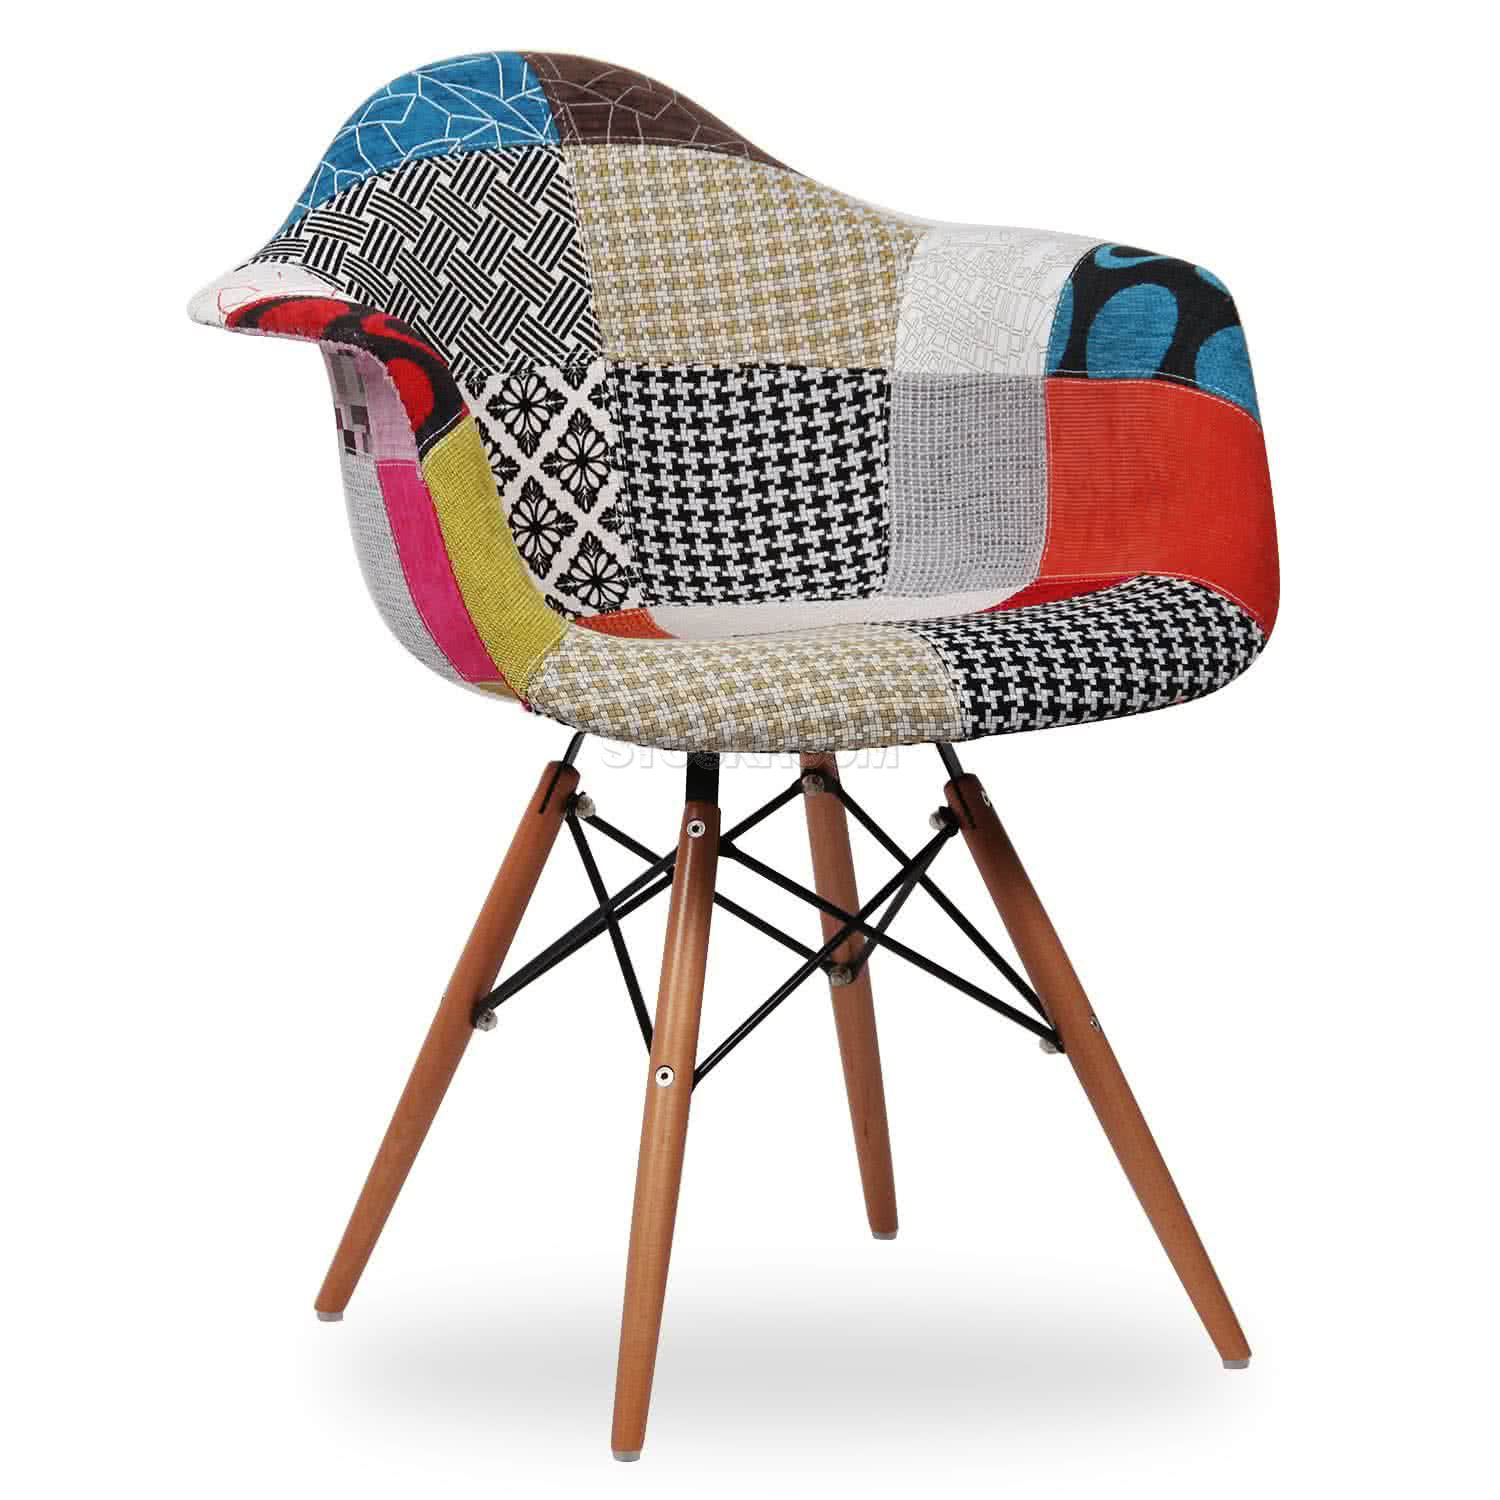 Charles Eames DAW Style Chair - Upholstered - Patched Version